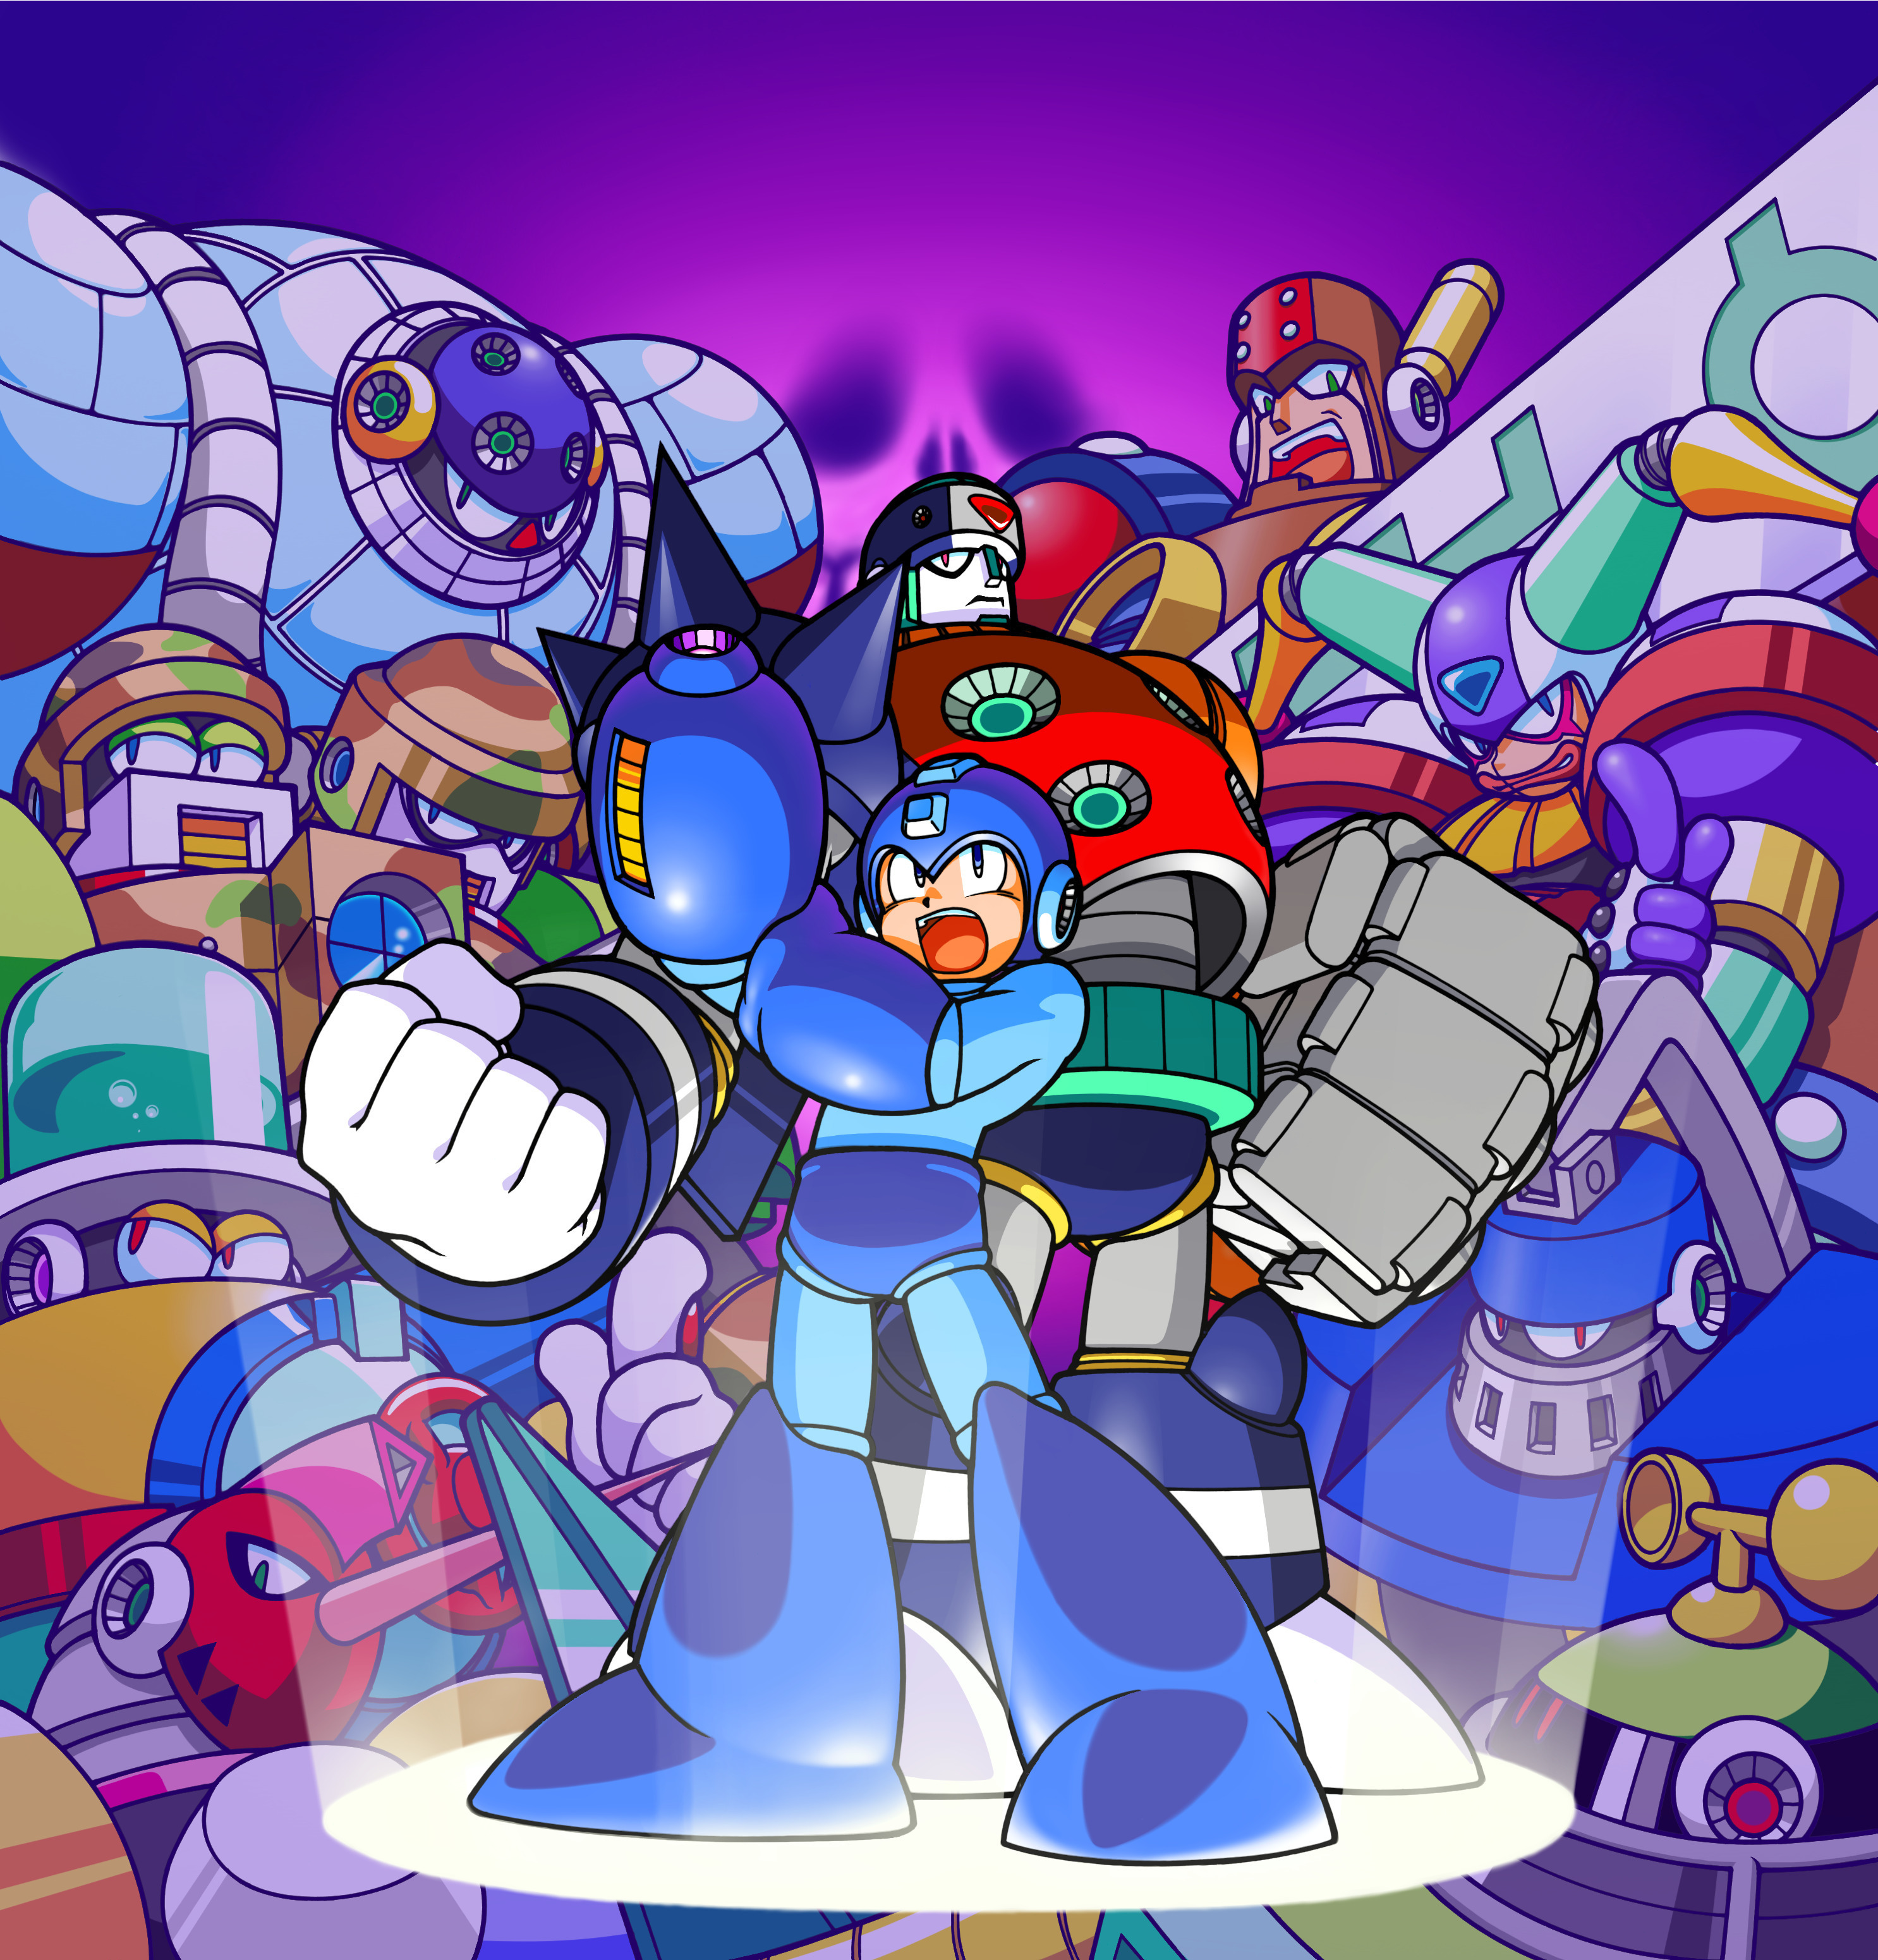 http://images4.wikia.nocookie.net/__cb20110426065026/megaman/images/1/1b/Mm8promo.jpg